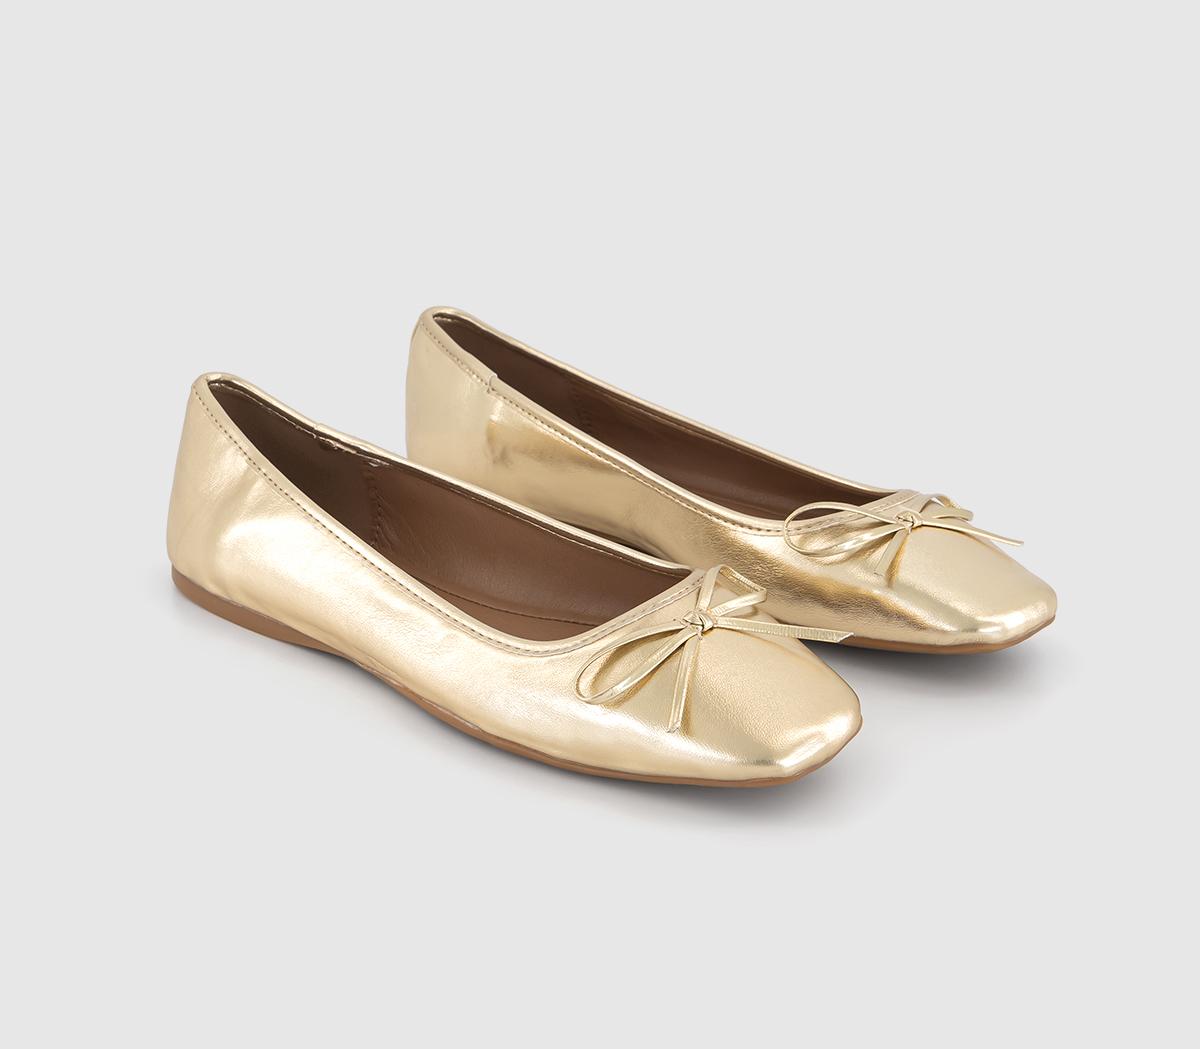 OFFICE Womens Five Star Square Toe Ballerina Shoes Gold Metalic, 7